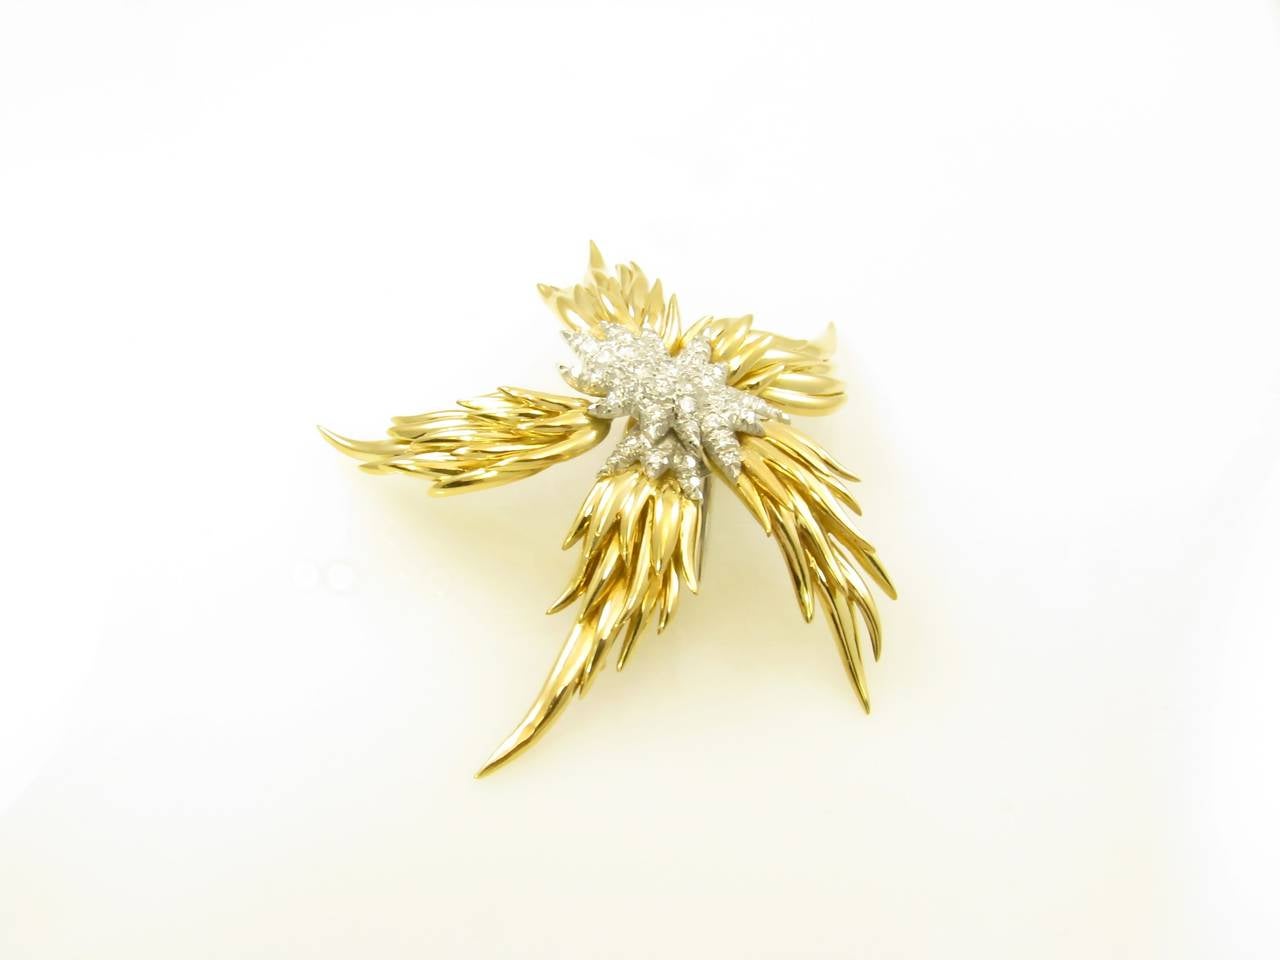 An 18 karat yellow gold, platinum and diamond set brooch.  Tiffany Schlumberger French.  The brooch is known as the flame.  Signed Tiffany Schlumberger, Made in France.  Gross weight approximately 37.6 grams and measures 3 inches long.  Circa 1980.